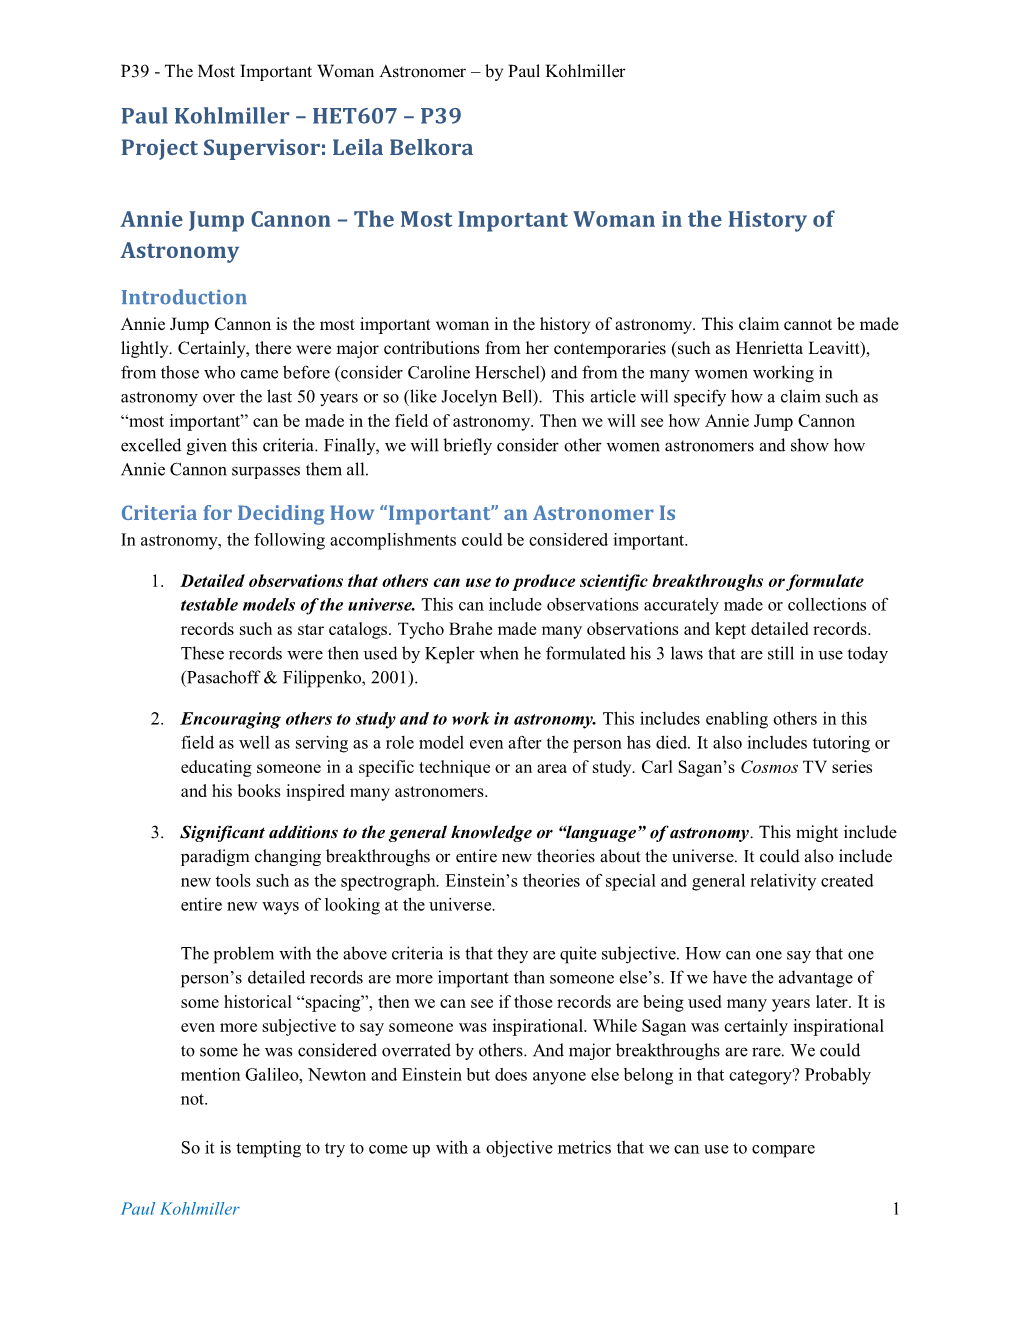 Annie Jump Cannon – the Most Important Woman in the History of Astronomy